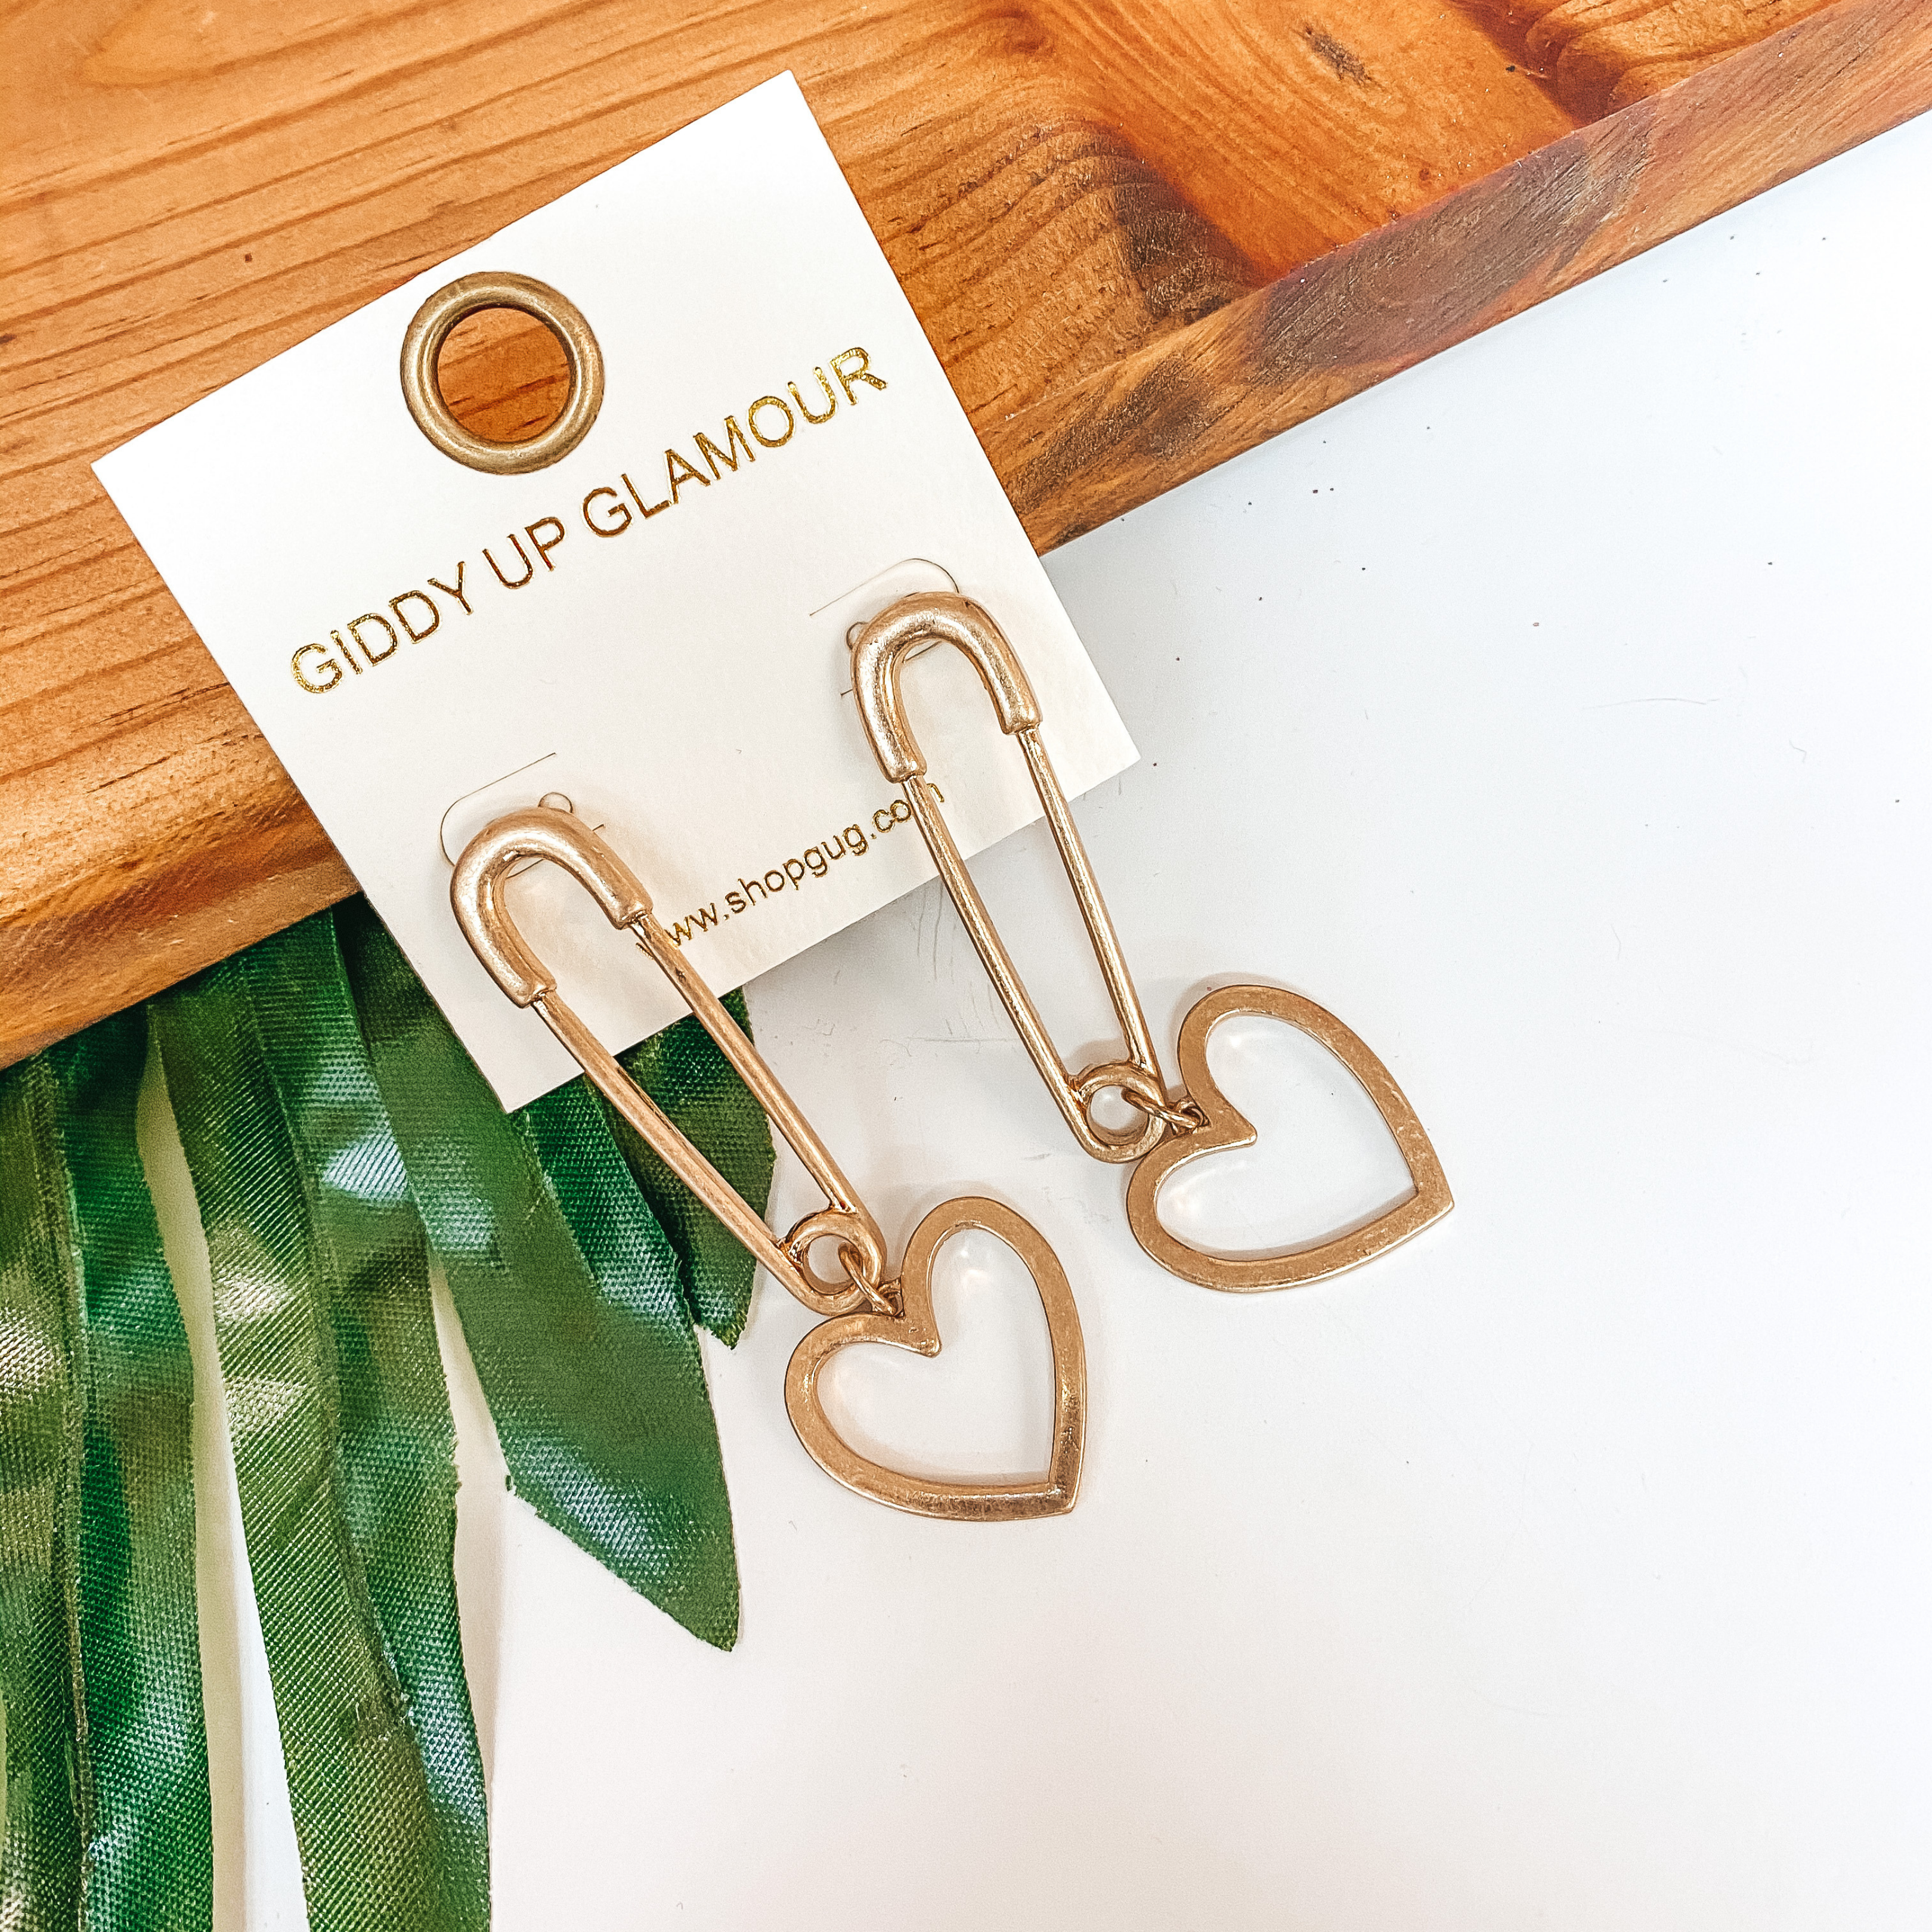 Safely Stylish Heart Dangle Earrings in Gold - Giddy Up Glamour Boutique